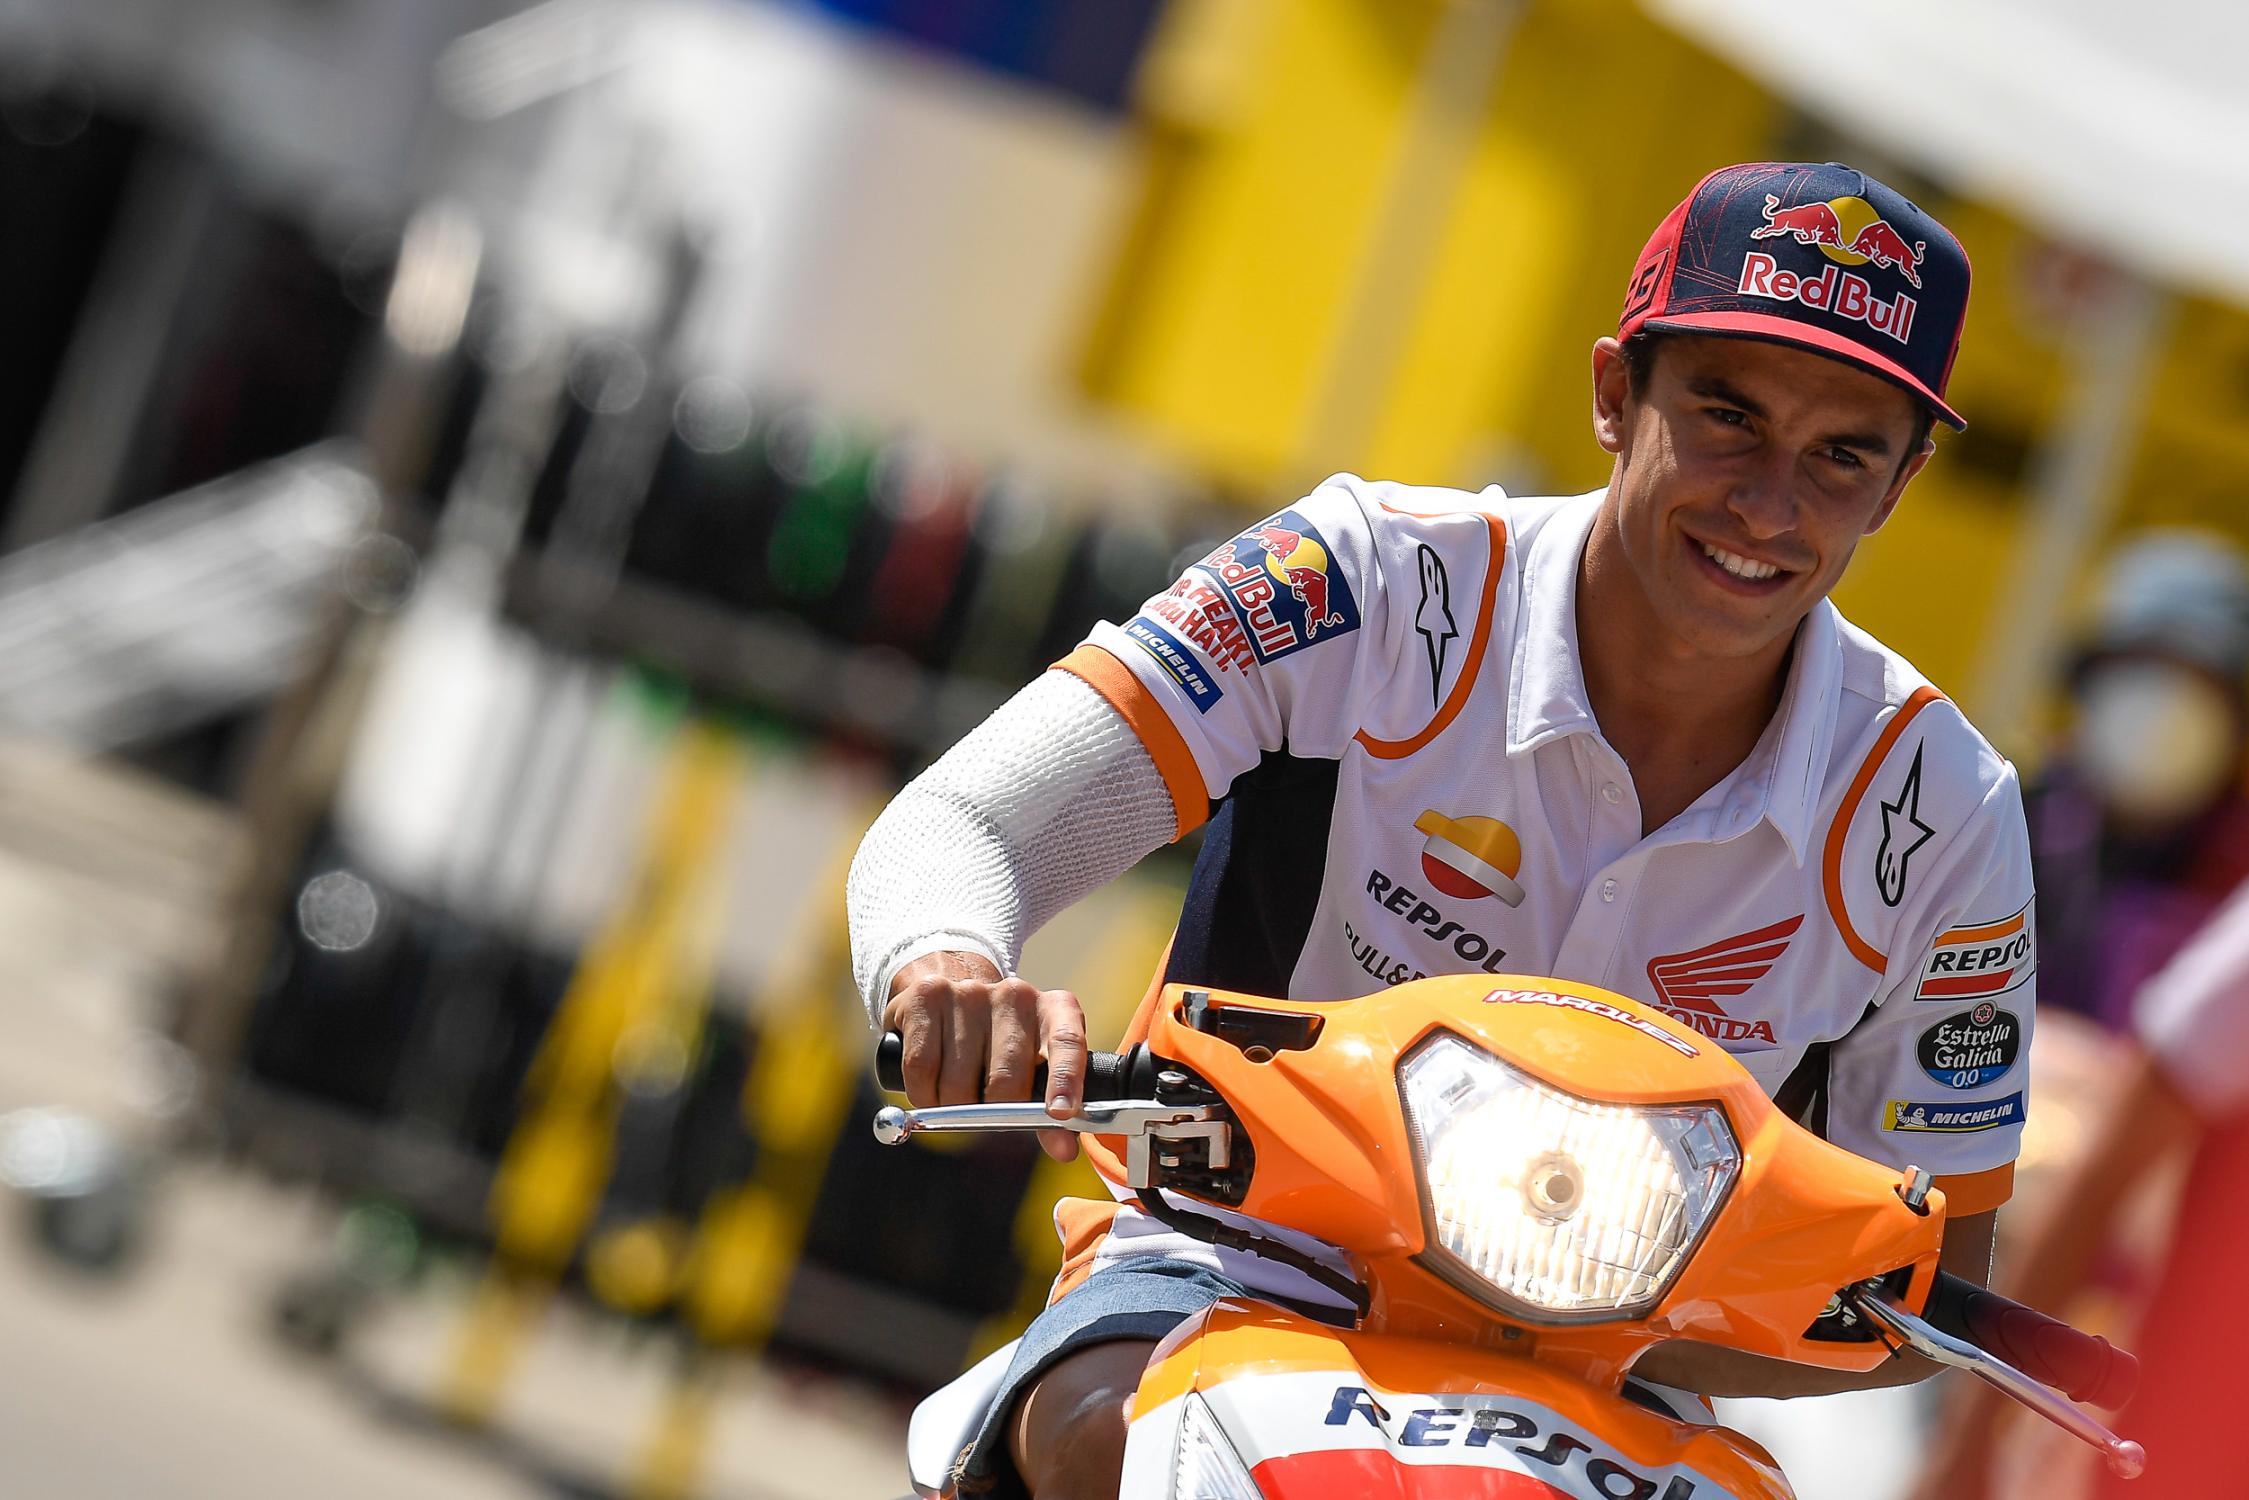 Great feeling to be returning to MotoGP - Marc Marquez